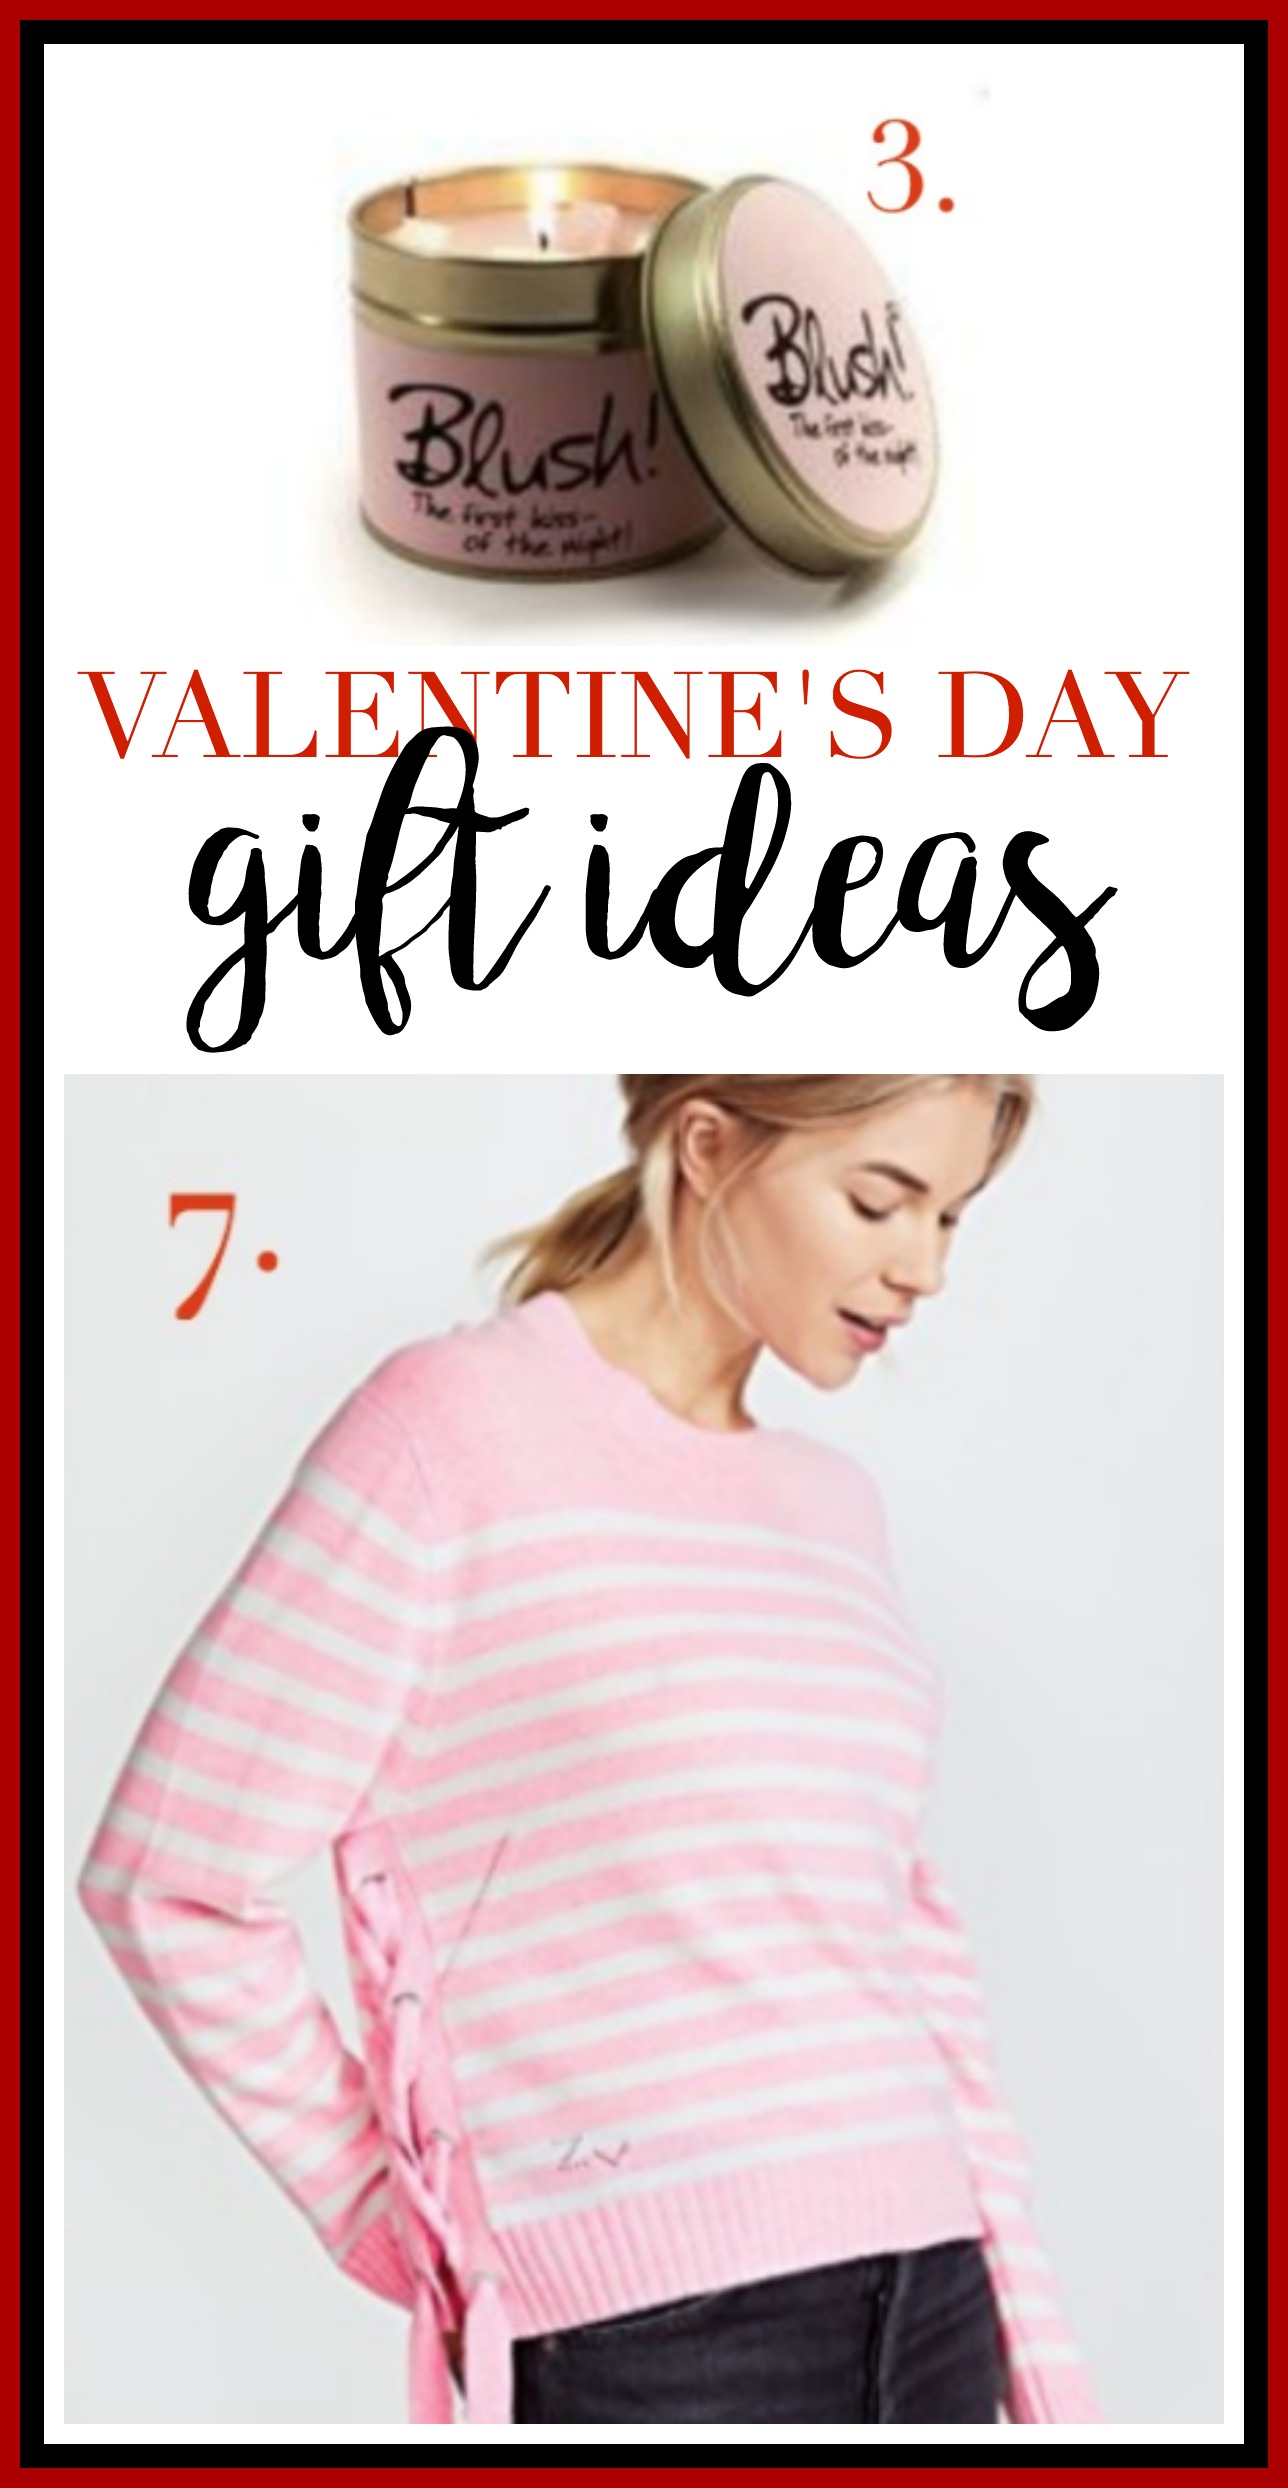 valentine's day, valentine's day gift ideas, gifts for girlfriends, gifts for boyfriends, romantic gifts, valentine's day apparel